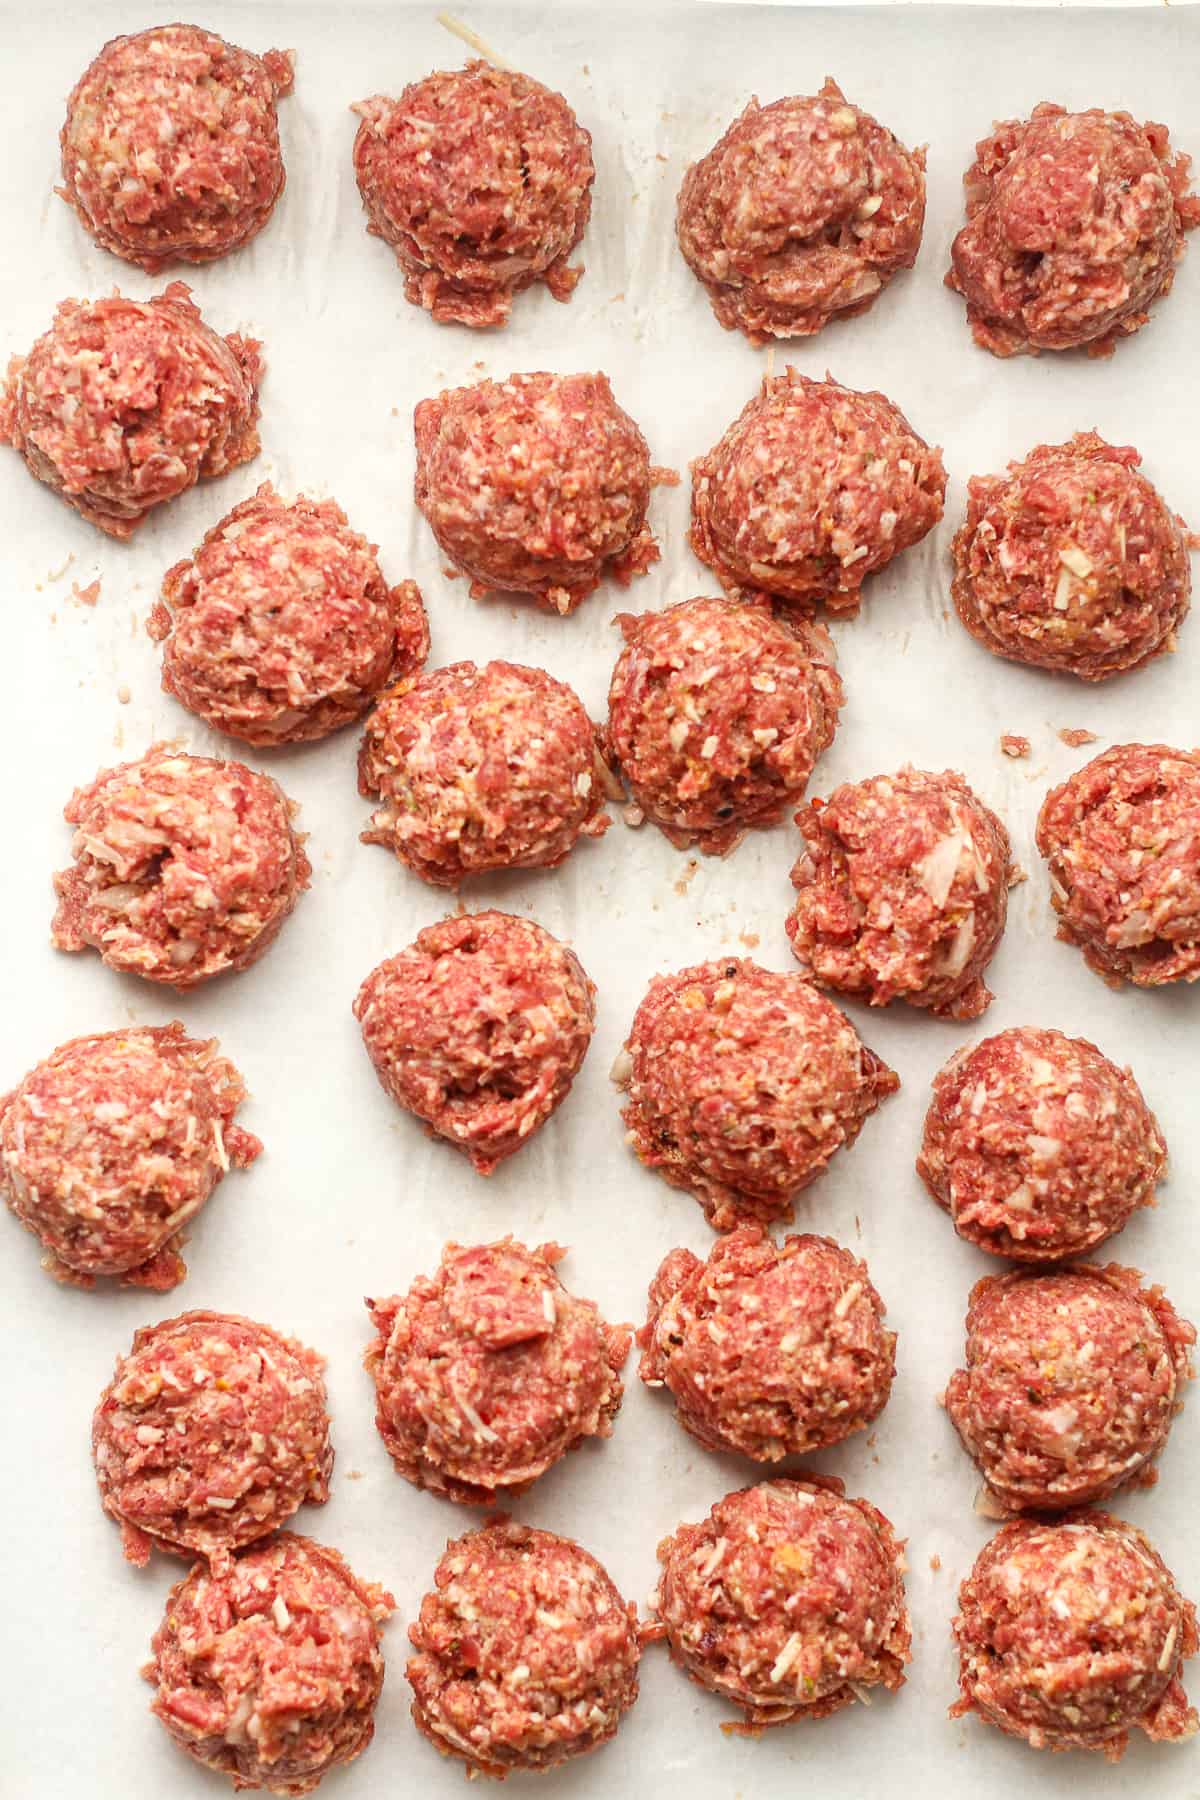 A pan of the scooped meatballs ready to cook.